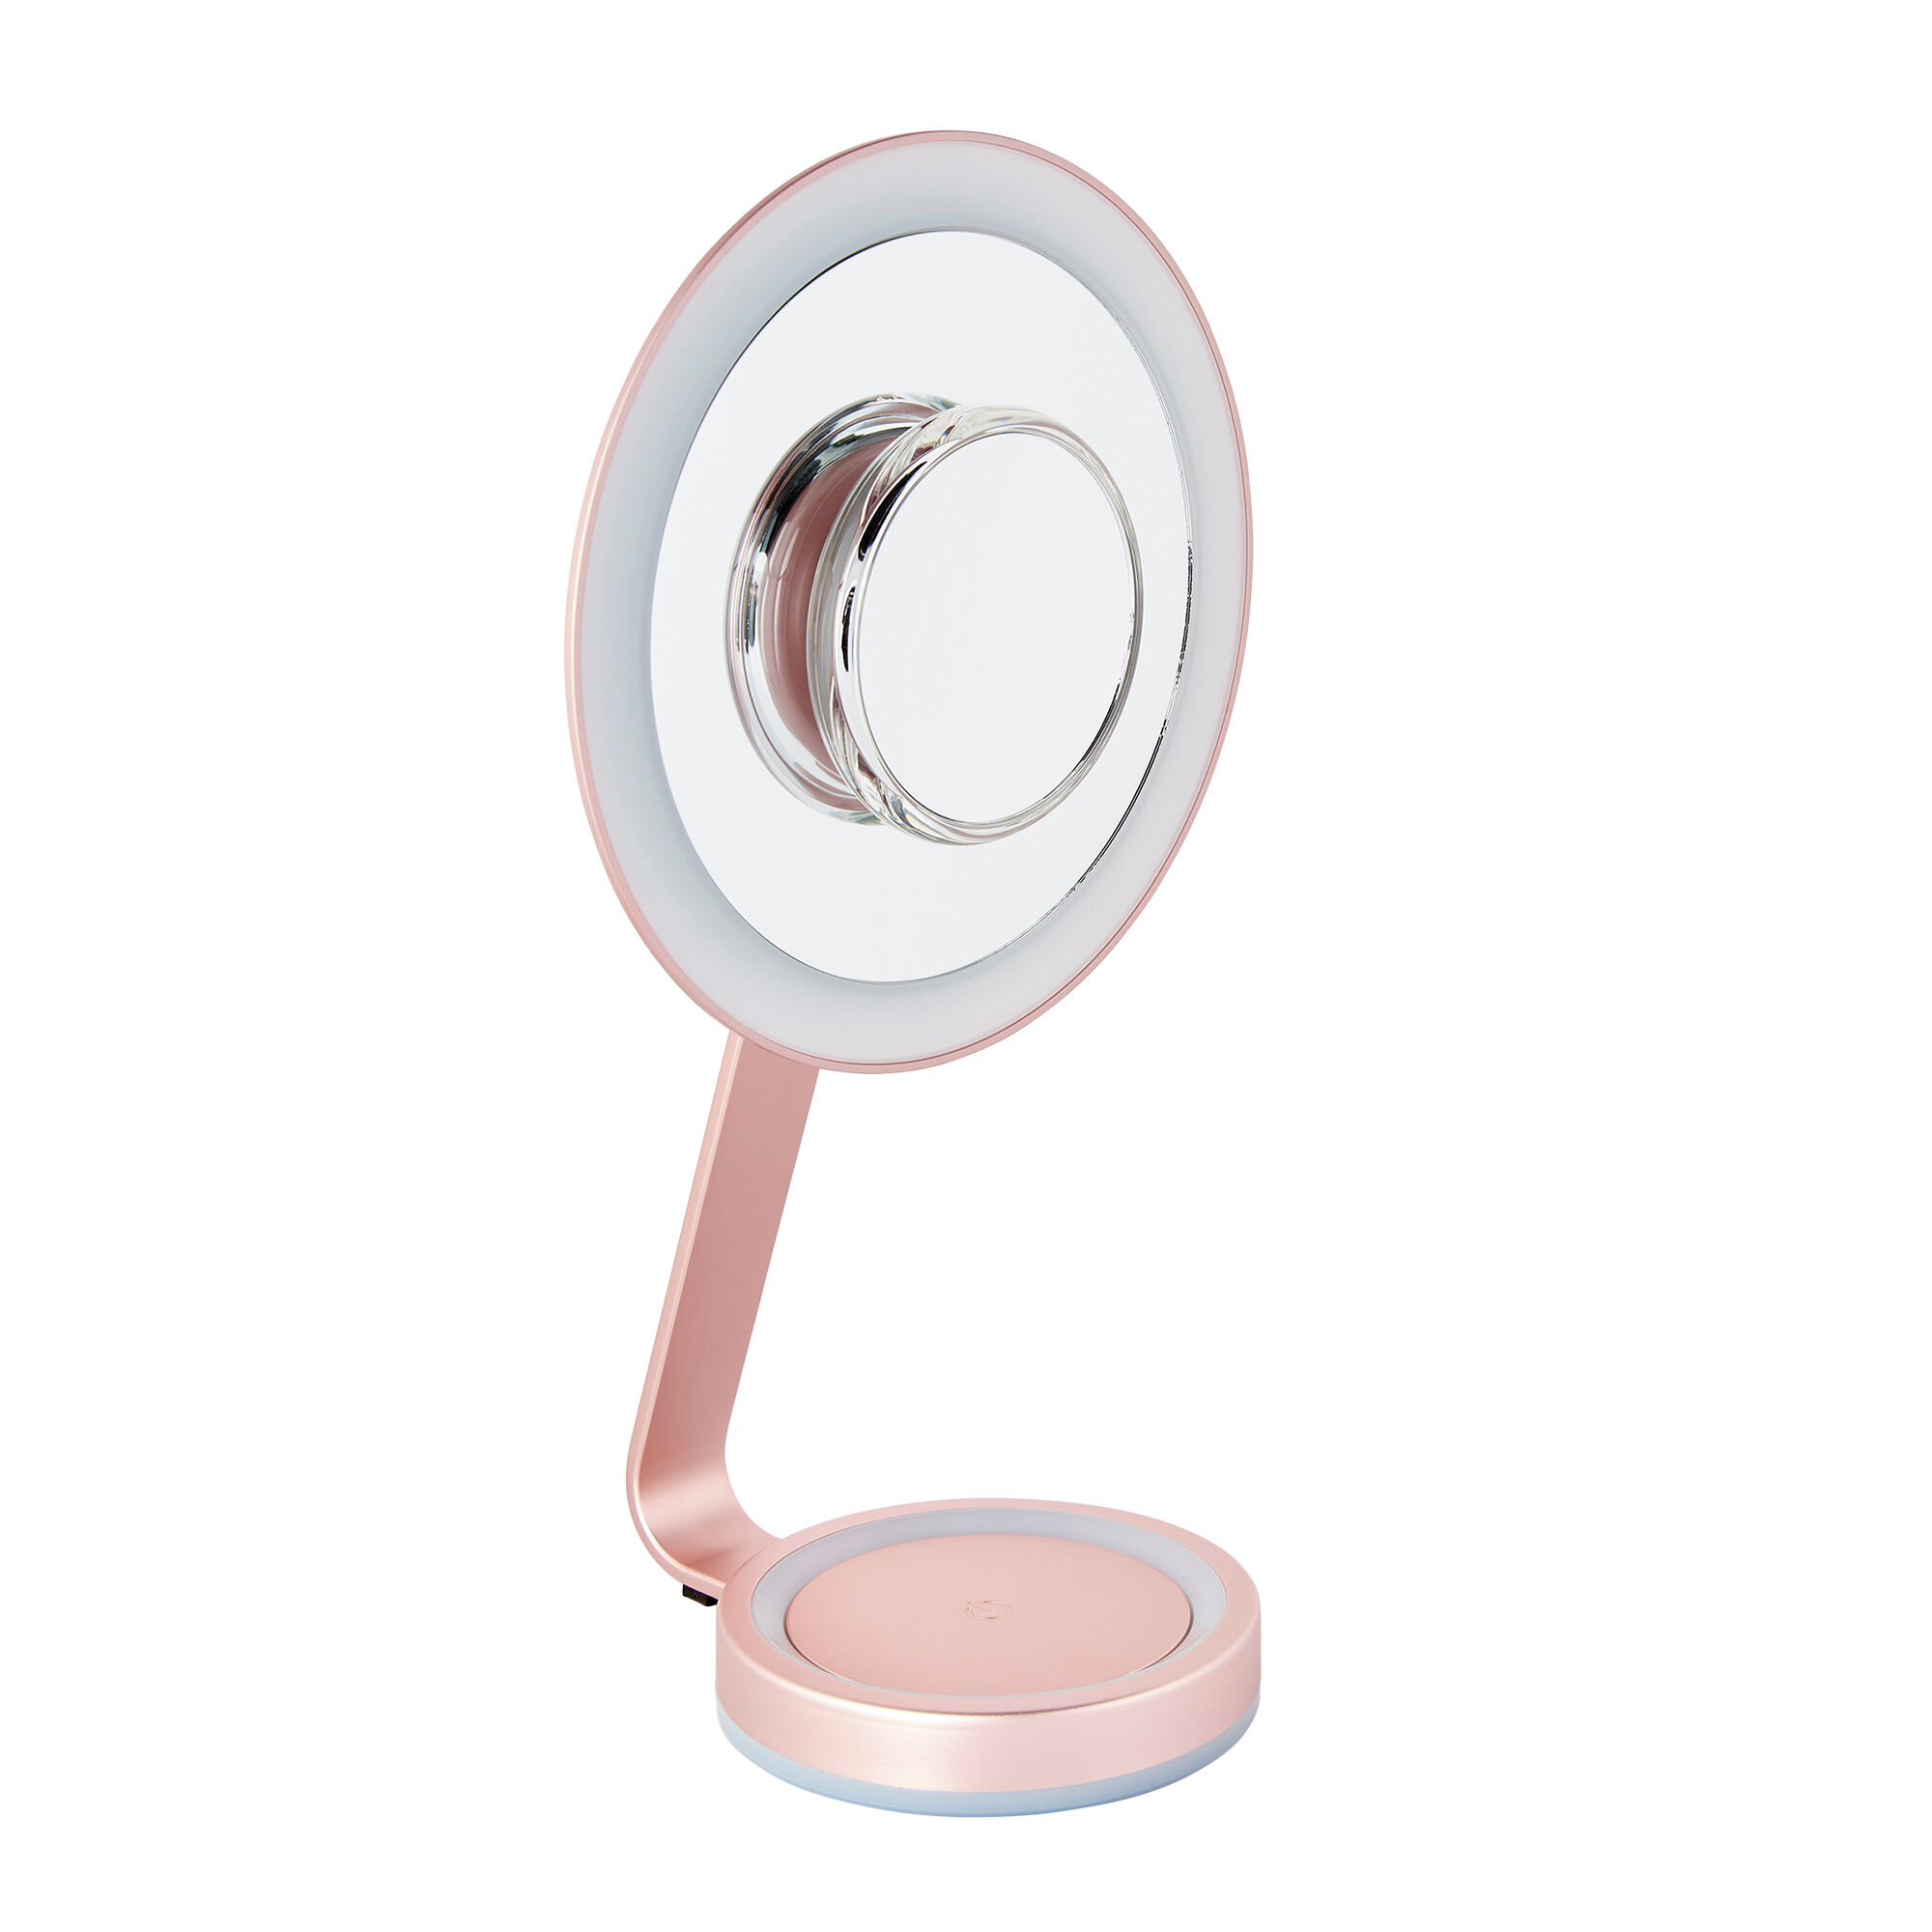 BaByliss Reflections Created By BaByliss Exquisite Beauty Mirror